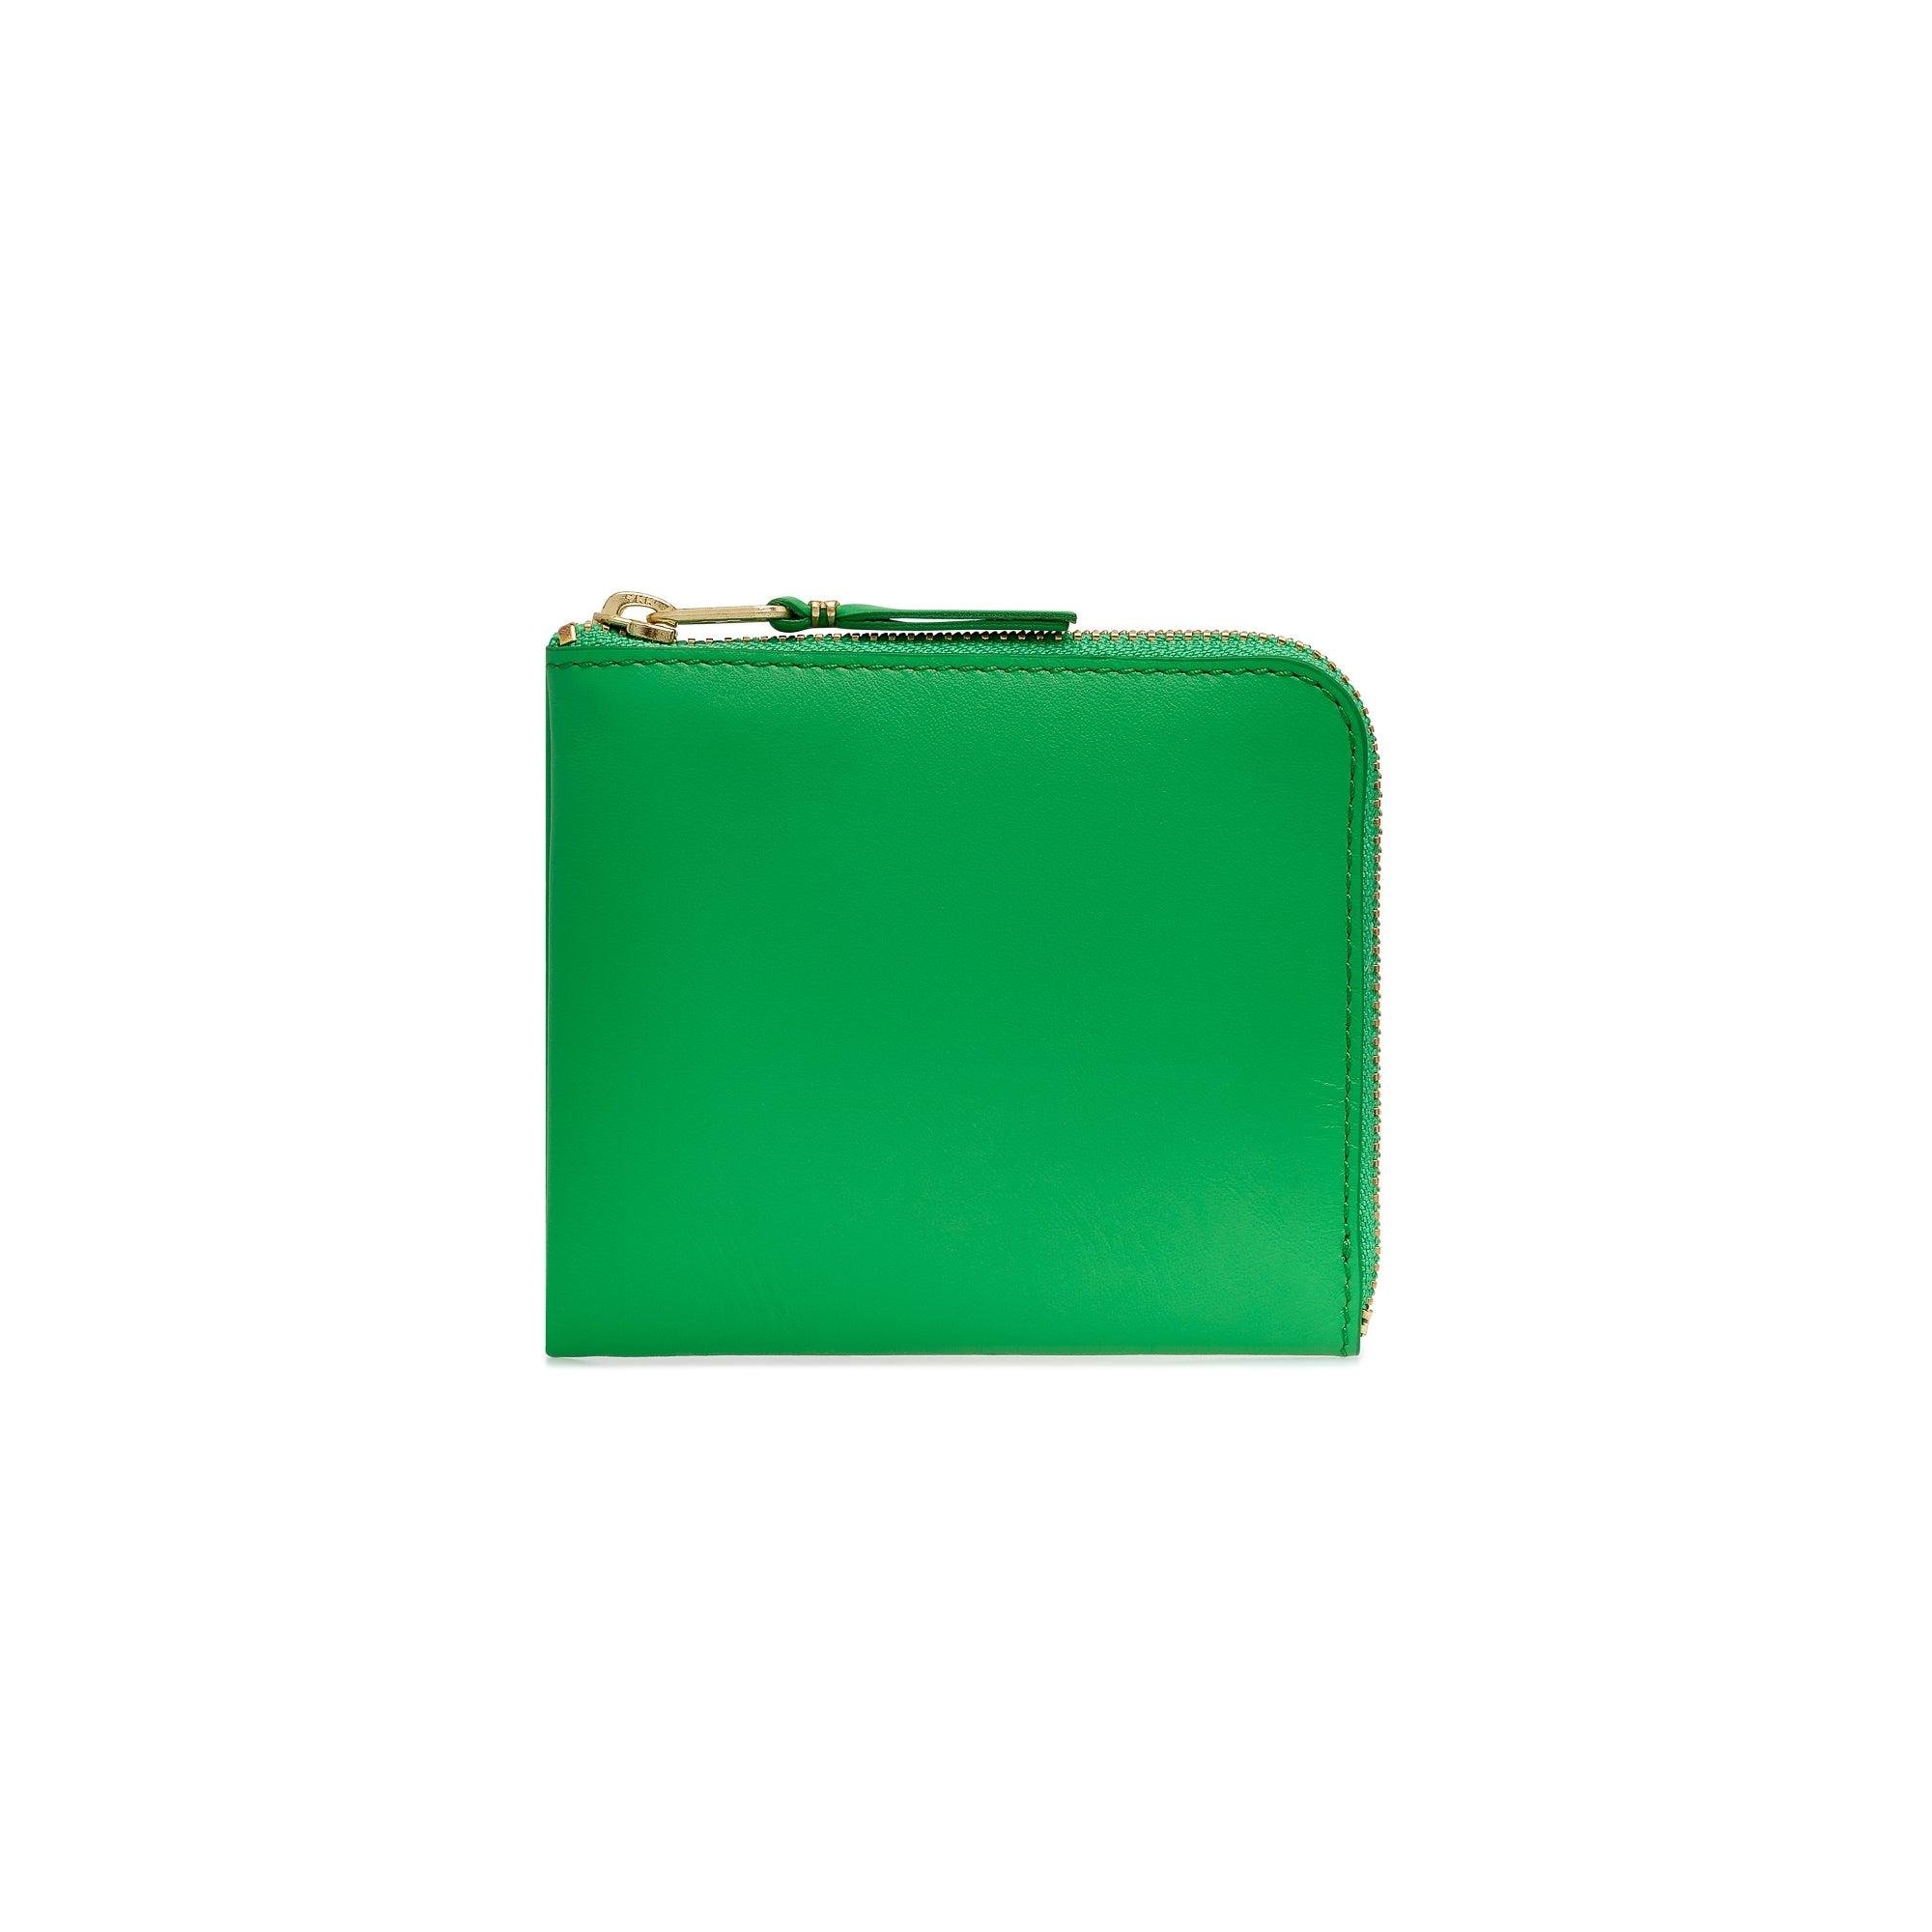 CDG Wallet - Classic Leather - (Green SA3100C) by COMME DES GARCONS